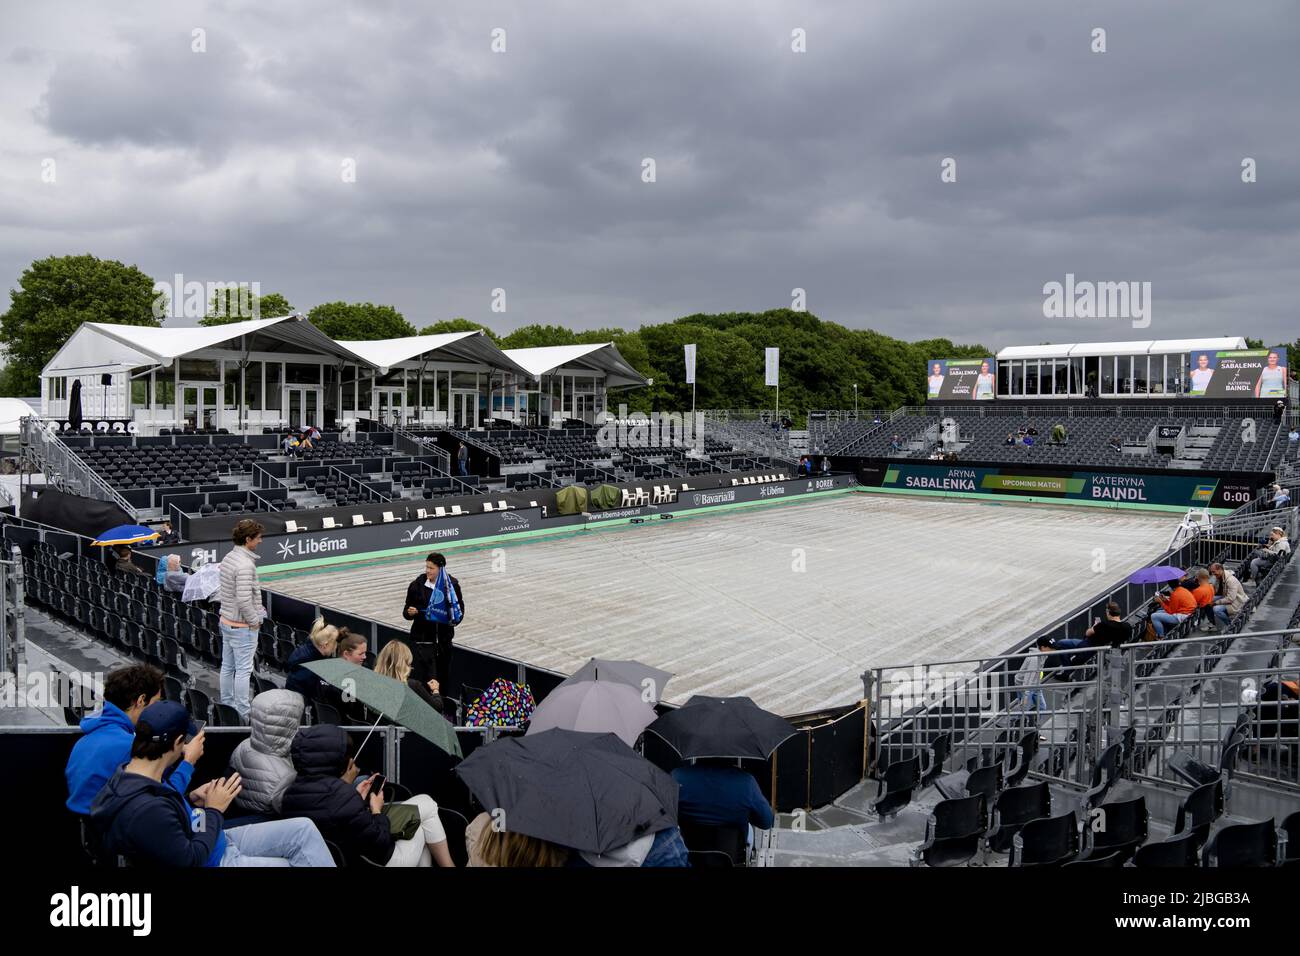 ROSMALEN - Netherlands, 06/06/2022, 2022-06-06 14:54:05 ROSMALEN - Due to  the rain, many matches at the international tennis tournament Libema Open  are postponed. The combined Dutch tennis tournament for men and women